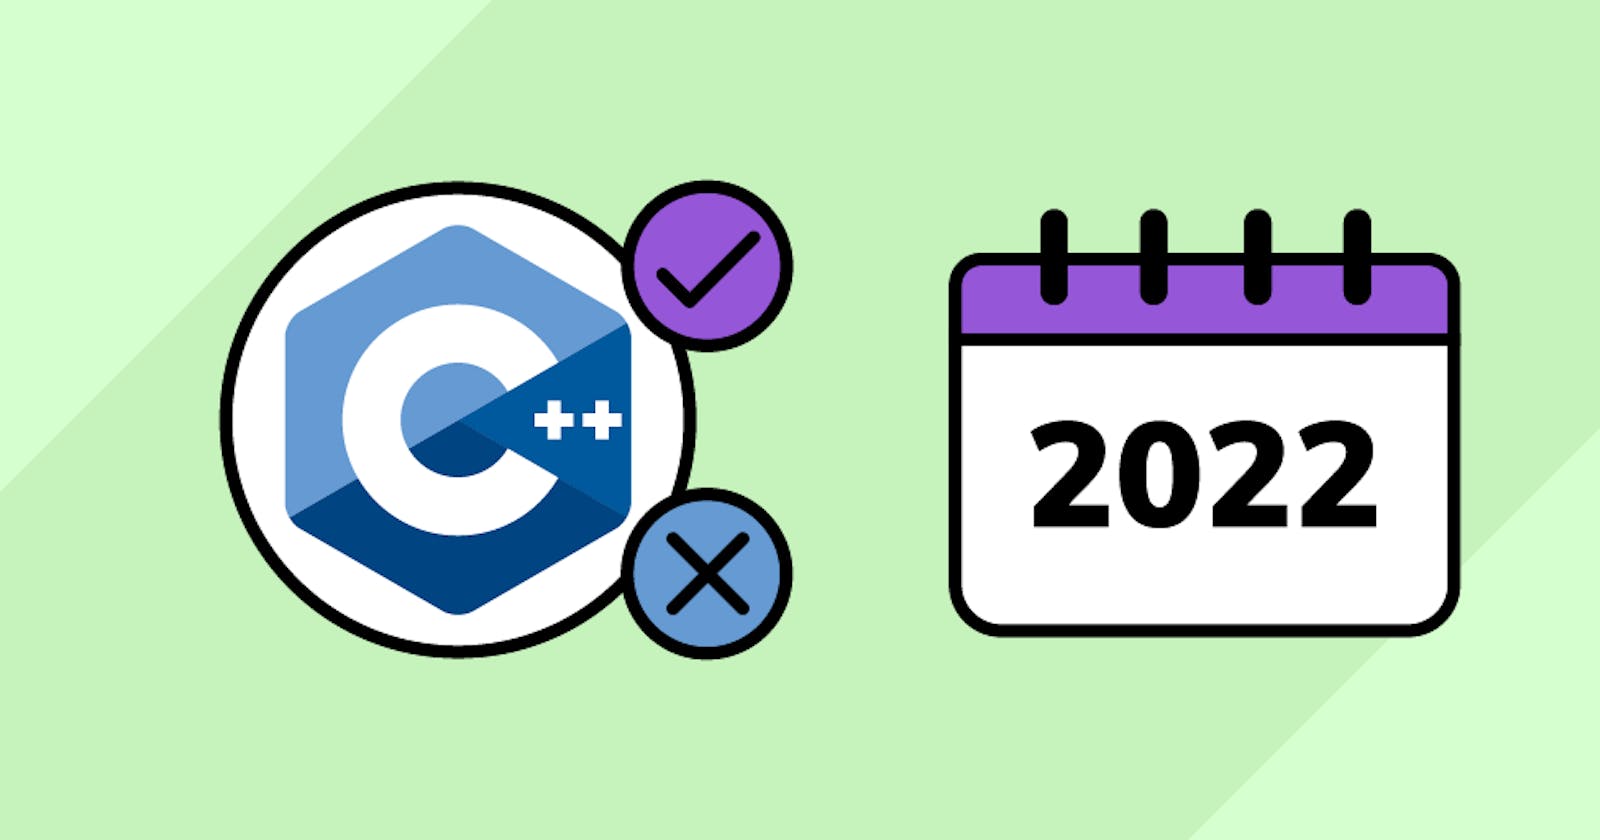 Is C++ still a good language to learn for 2022?